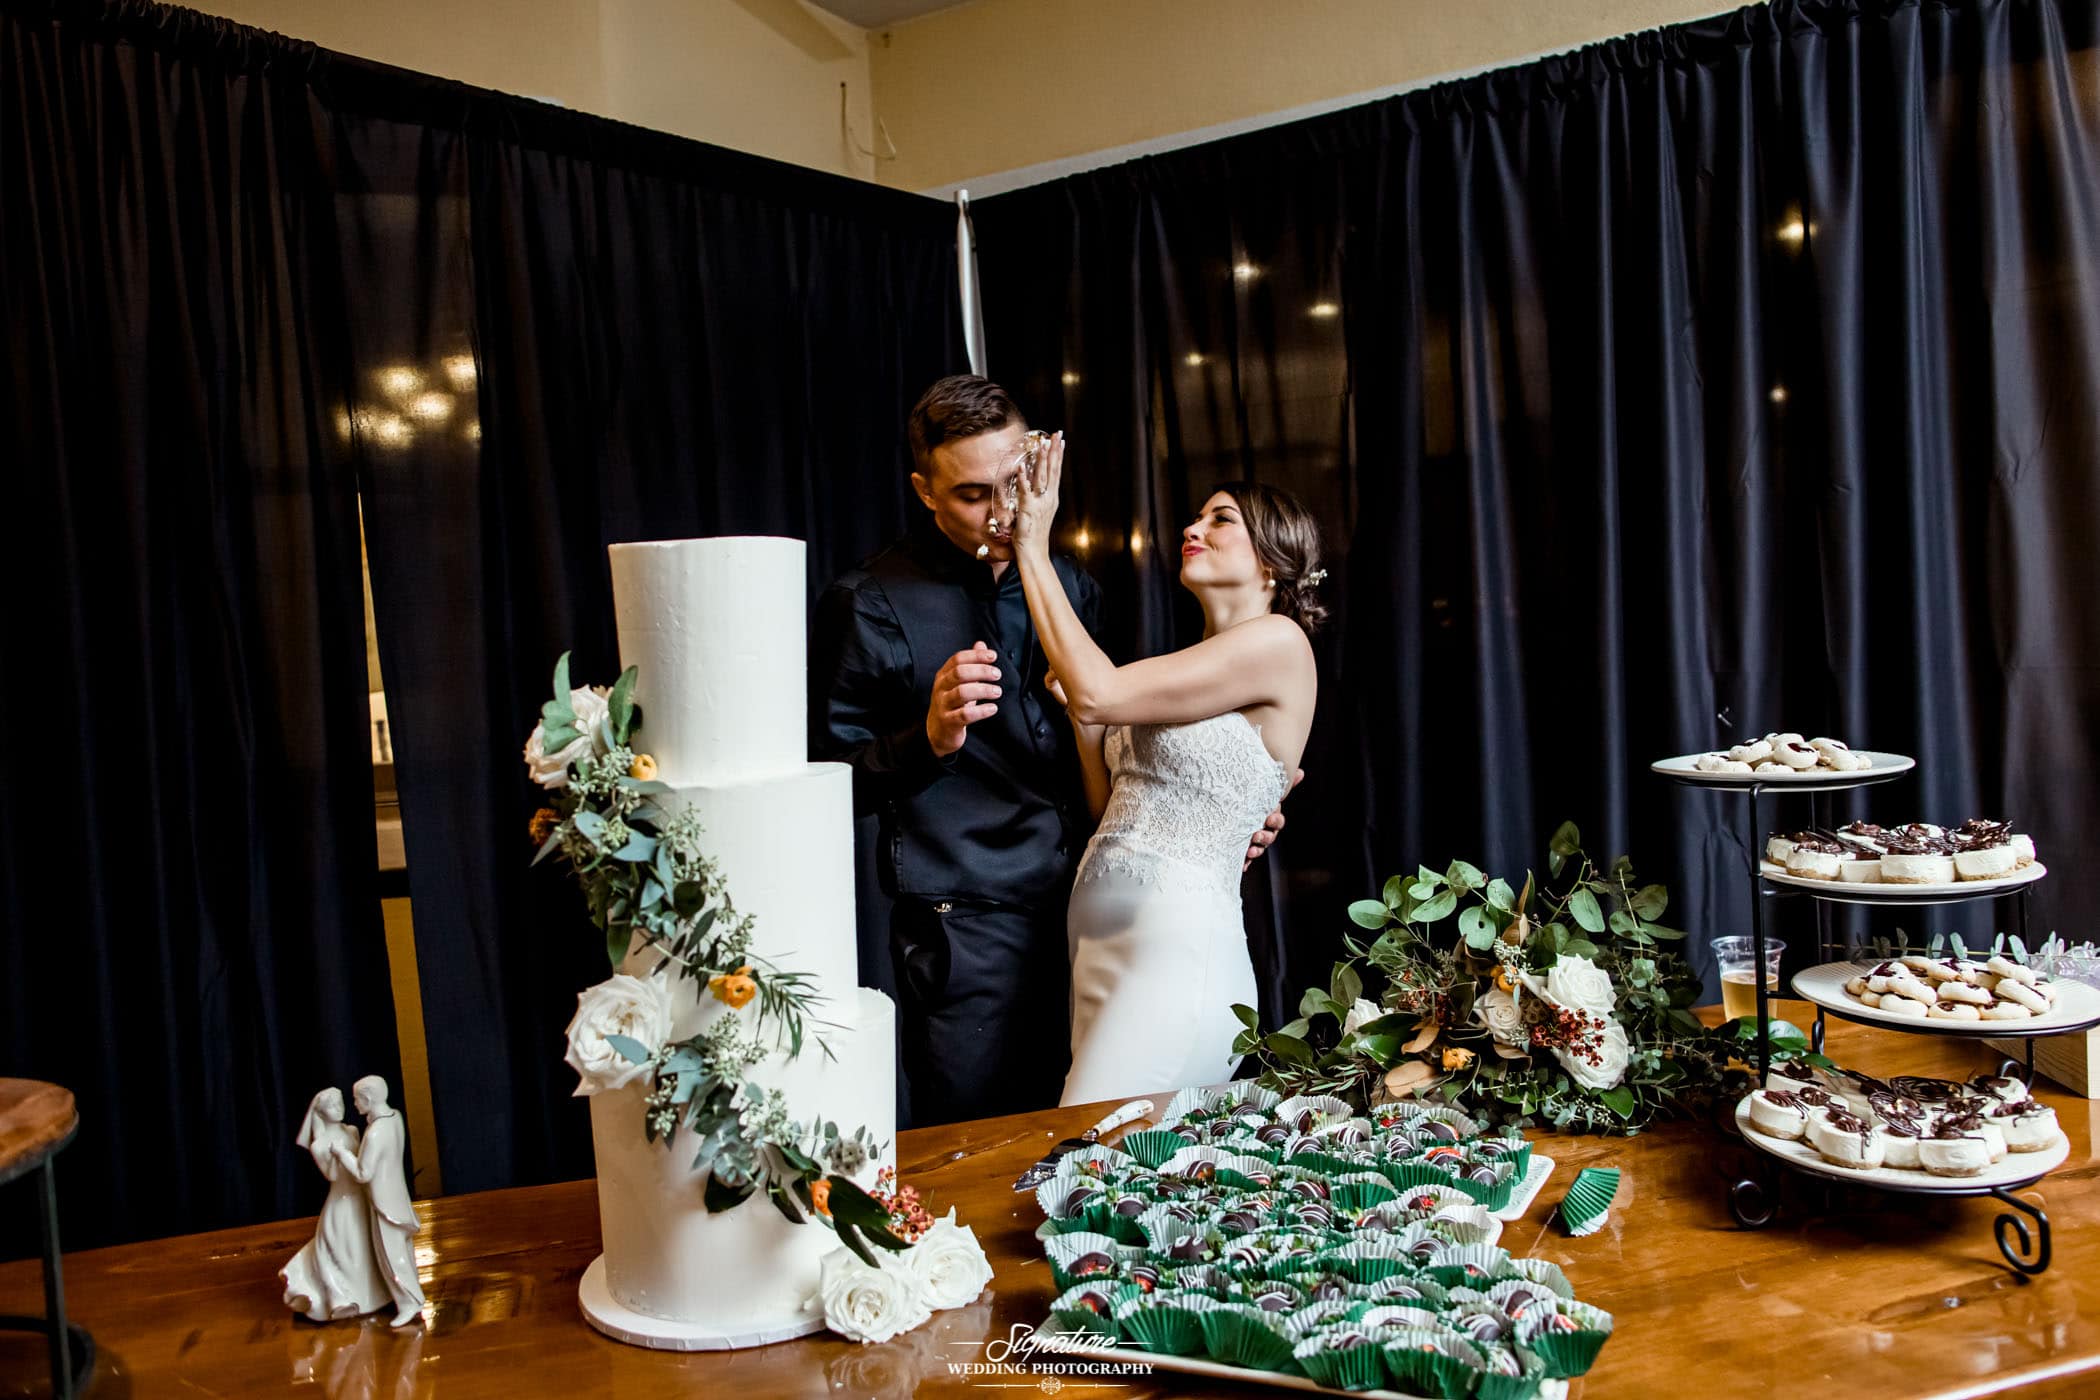 Bride putting cake in groom's face